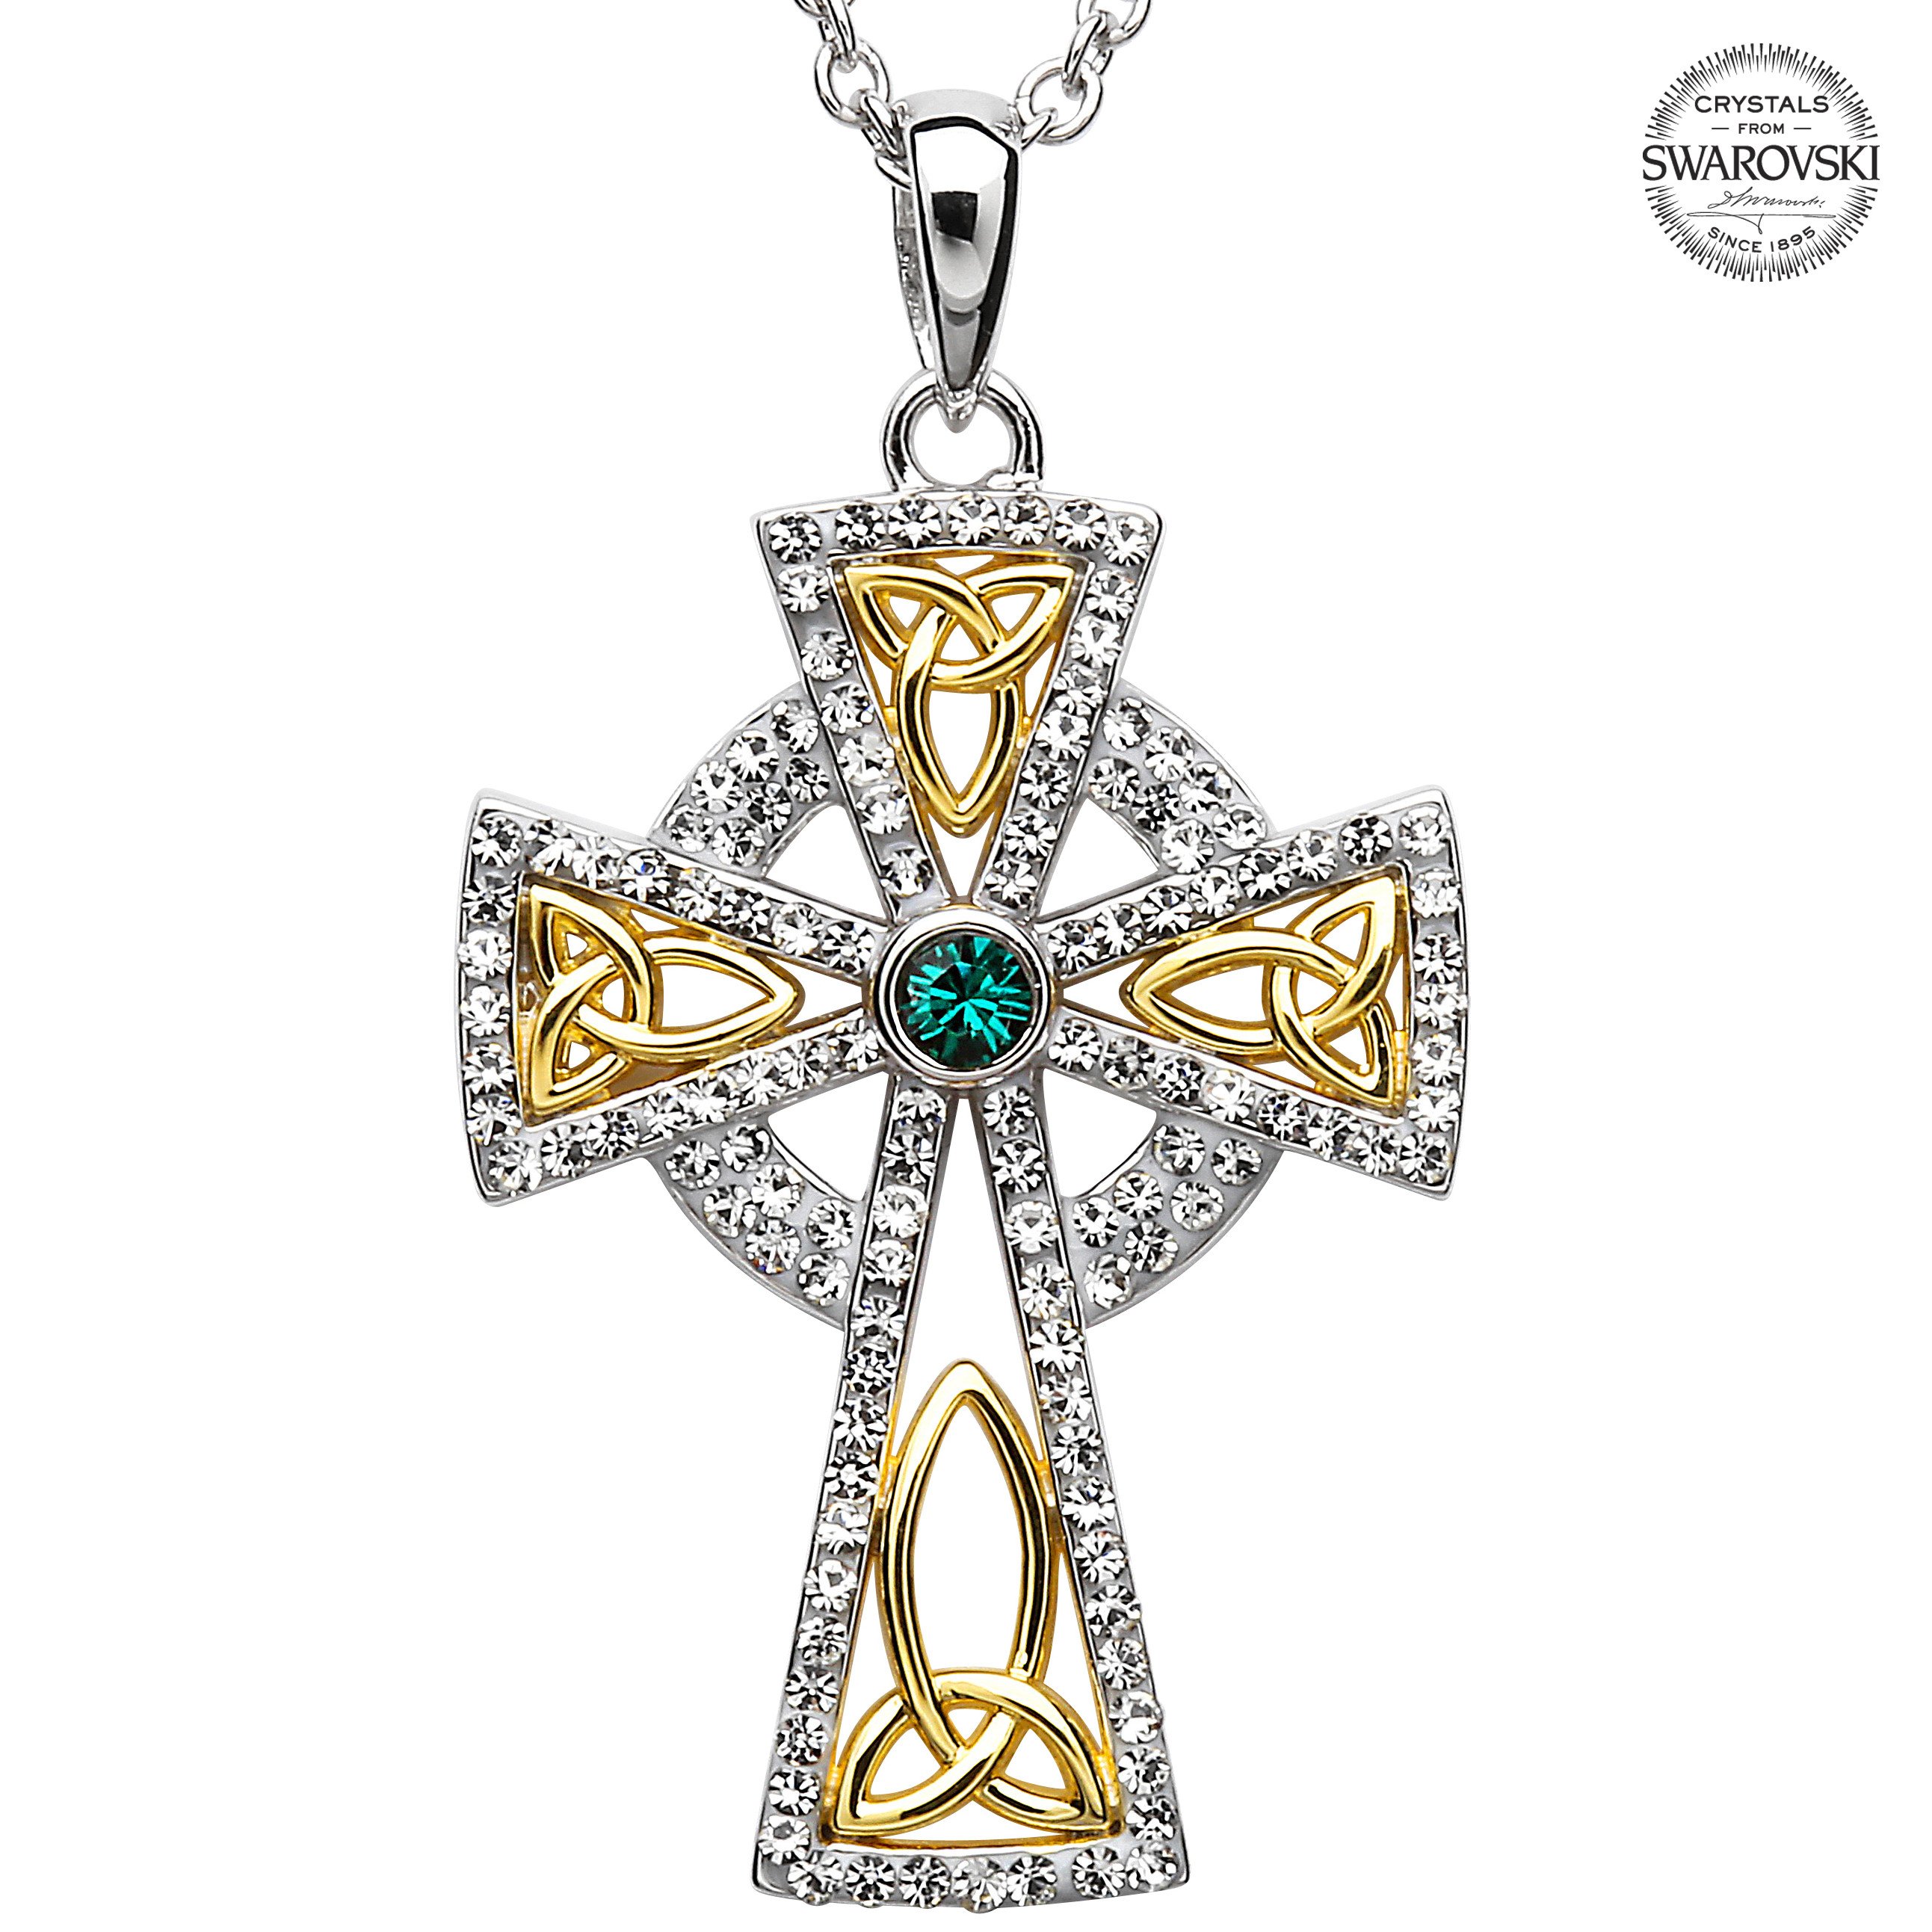 Product image for Celtic Cross Necklace - Sterling Silver and Gold Plated Trinity Gold Plated Cross Embellished with Emerald Swarovski Crystals